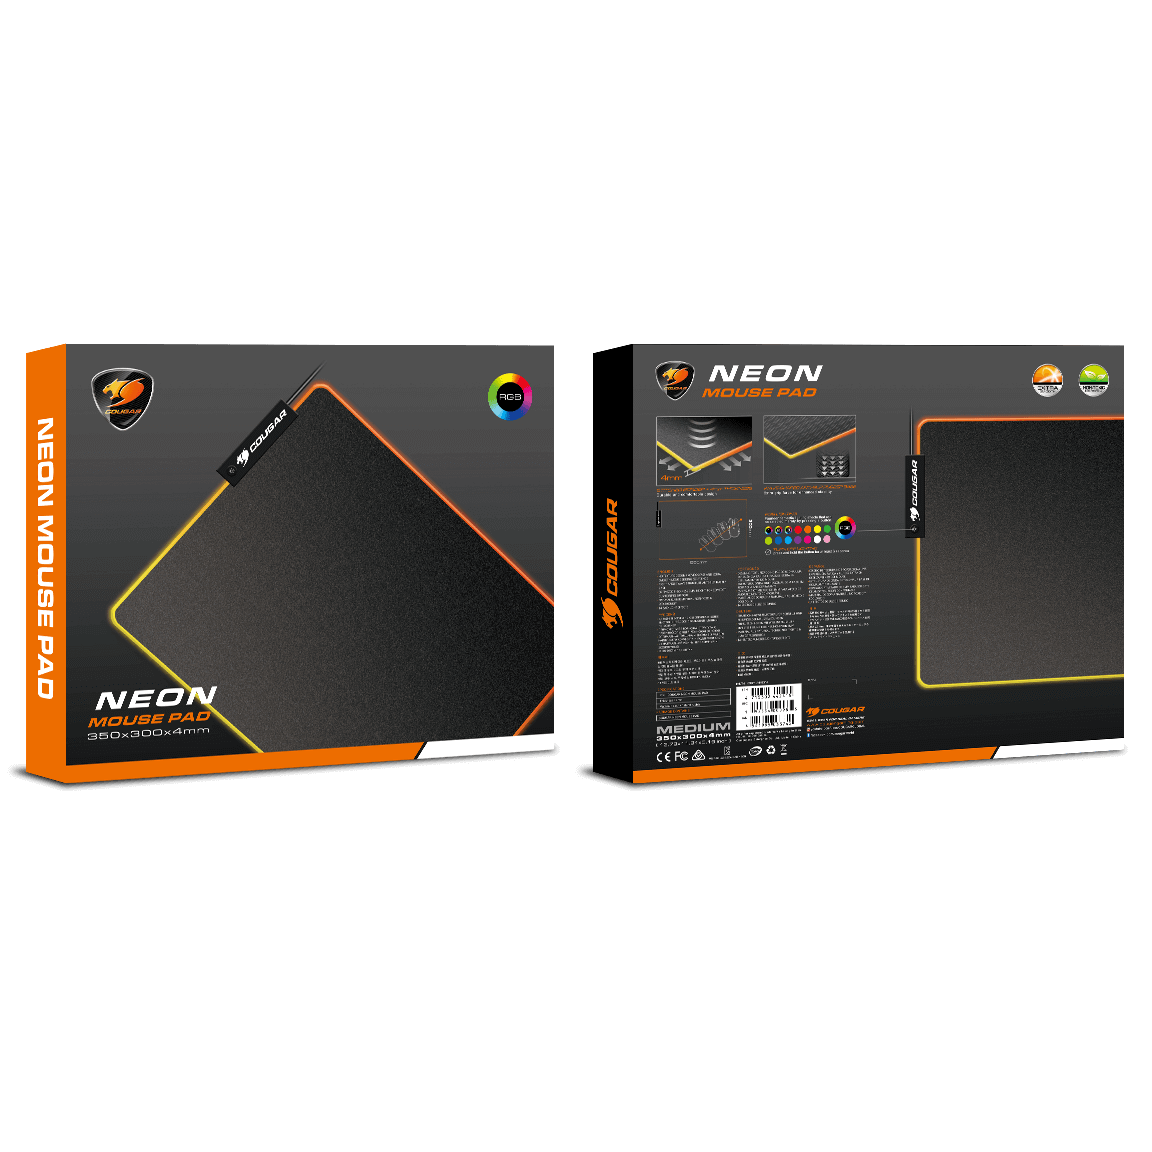 Cougar Neon RGB Gaming mouse pad 350 x 300 x 4 mm